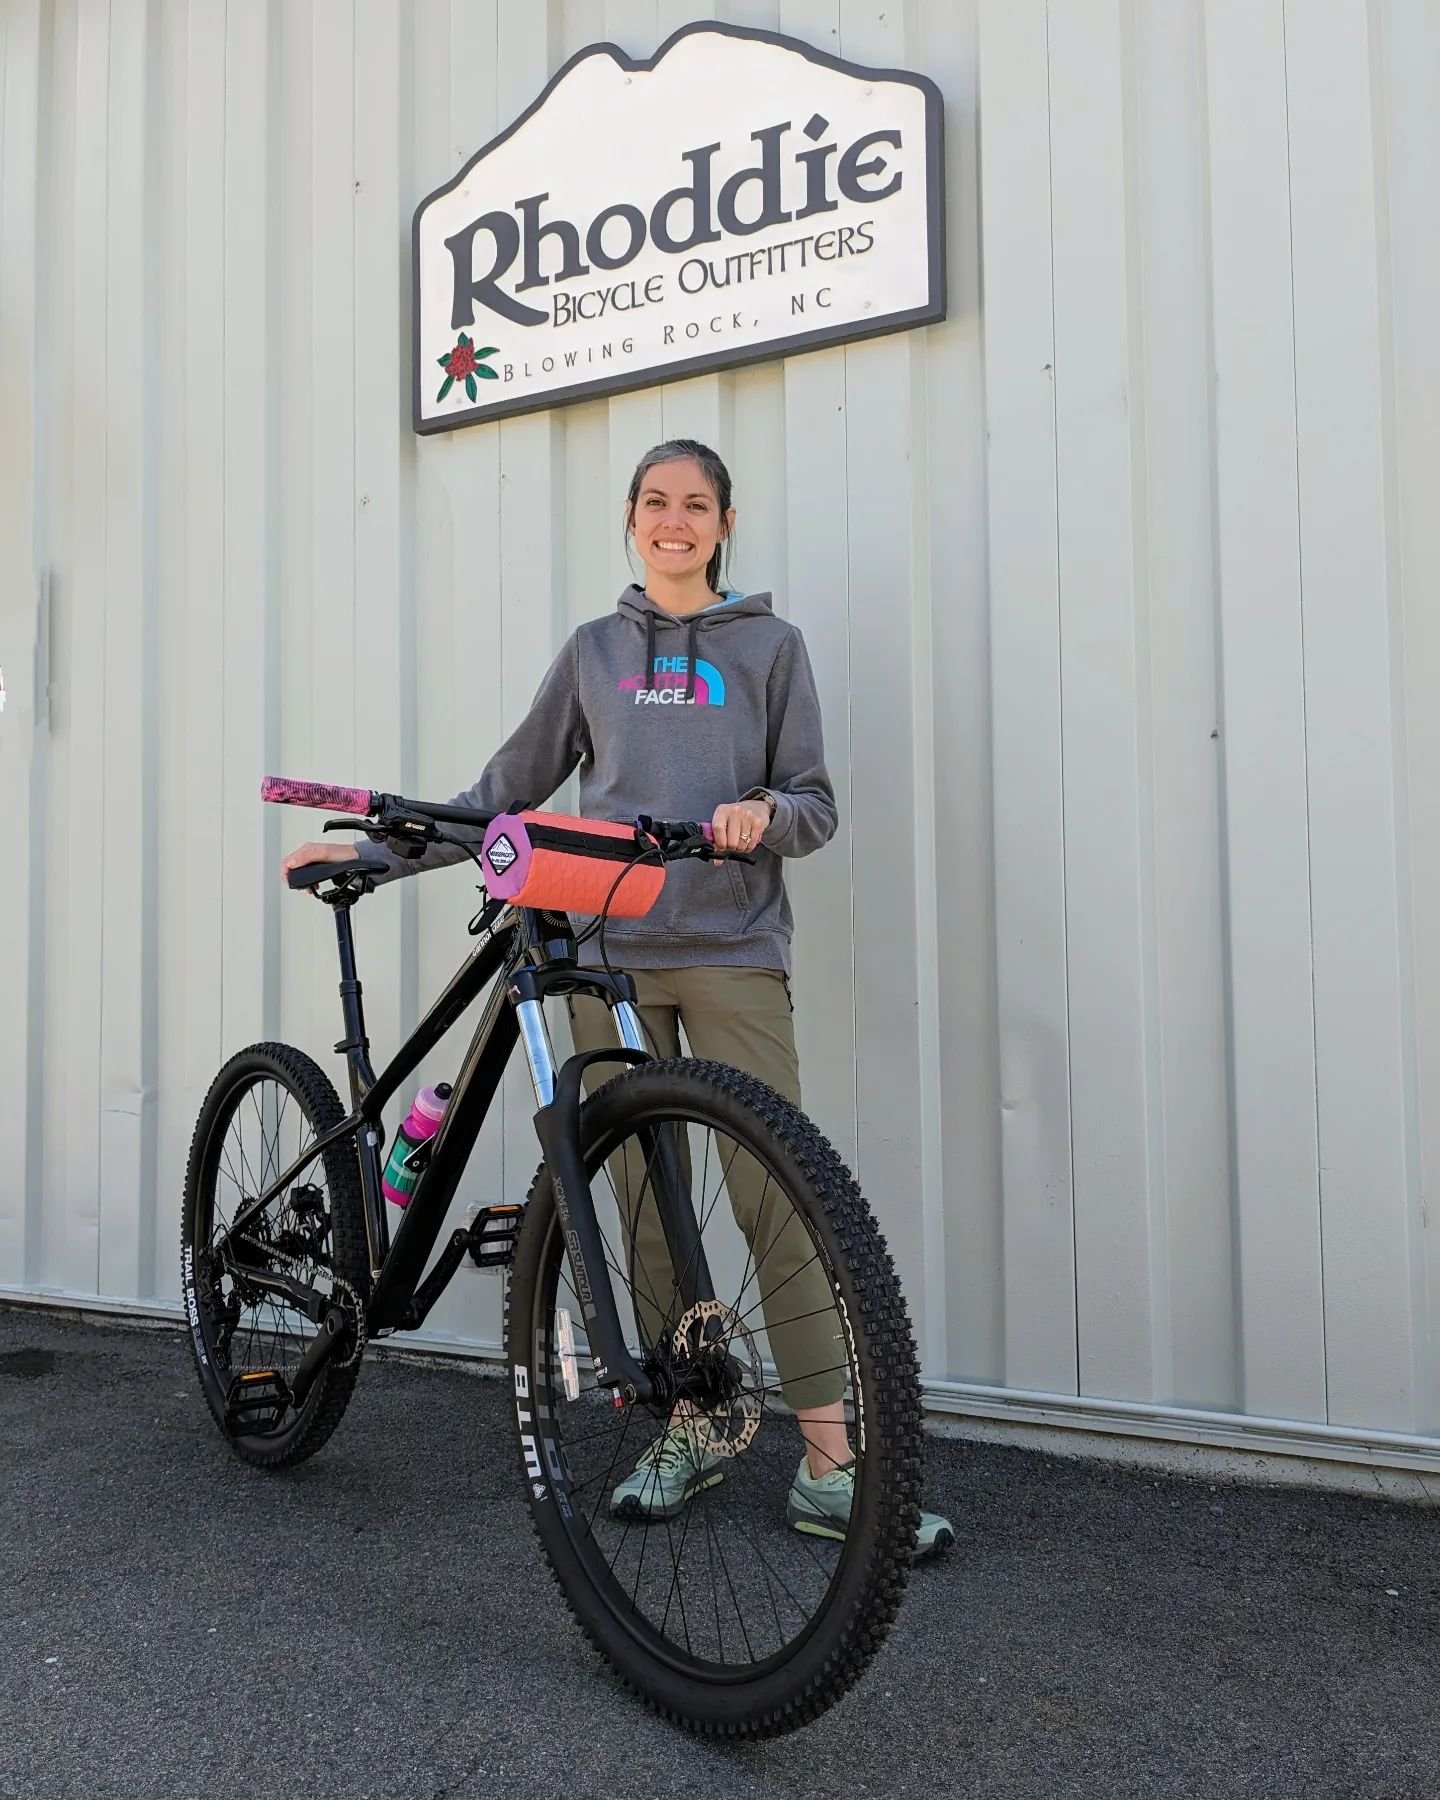 Happy New Bike Day to Deb!! She scored a sweet Cannondale Habit HT and accessorized gorgeously with a Coral/Lilac MOOSEPACKS Handlebar Bag. Thanks so much for choosing Rhoddie - enjoy the ride!
&bull;
&bull;
&bull;
#Cannondale #CannondaleHabit #mtnbi